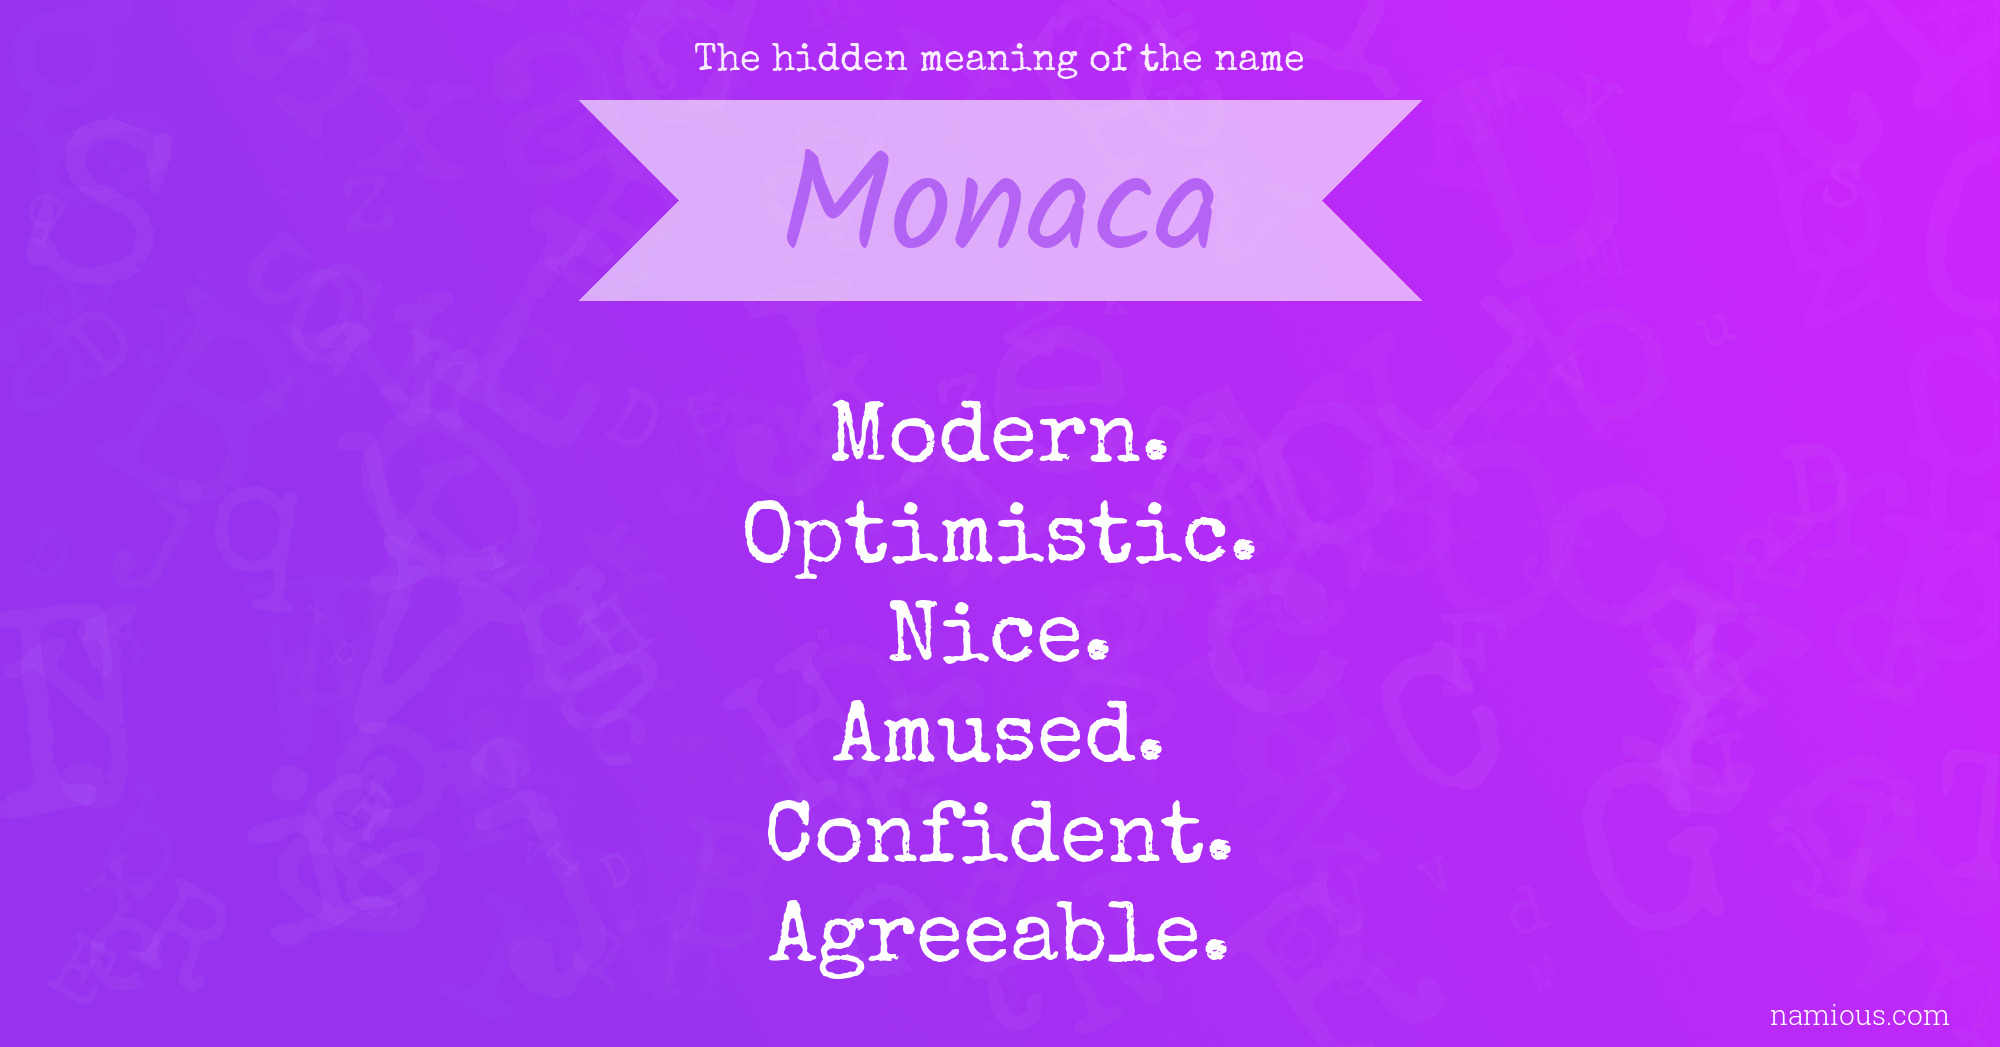 The hidden meaning of the name Monaca